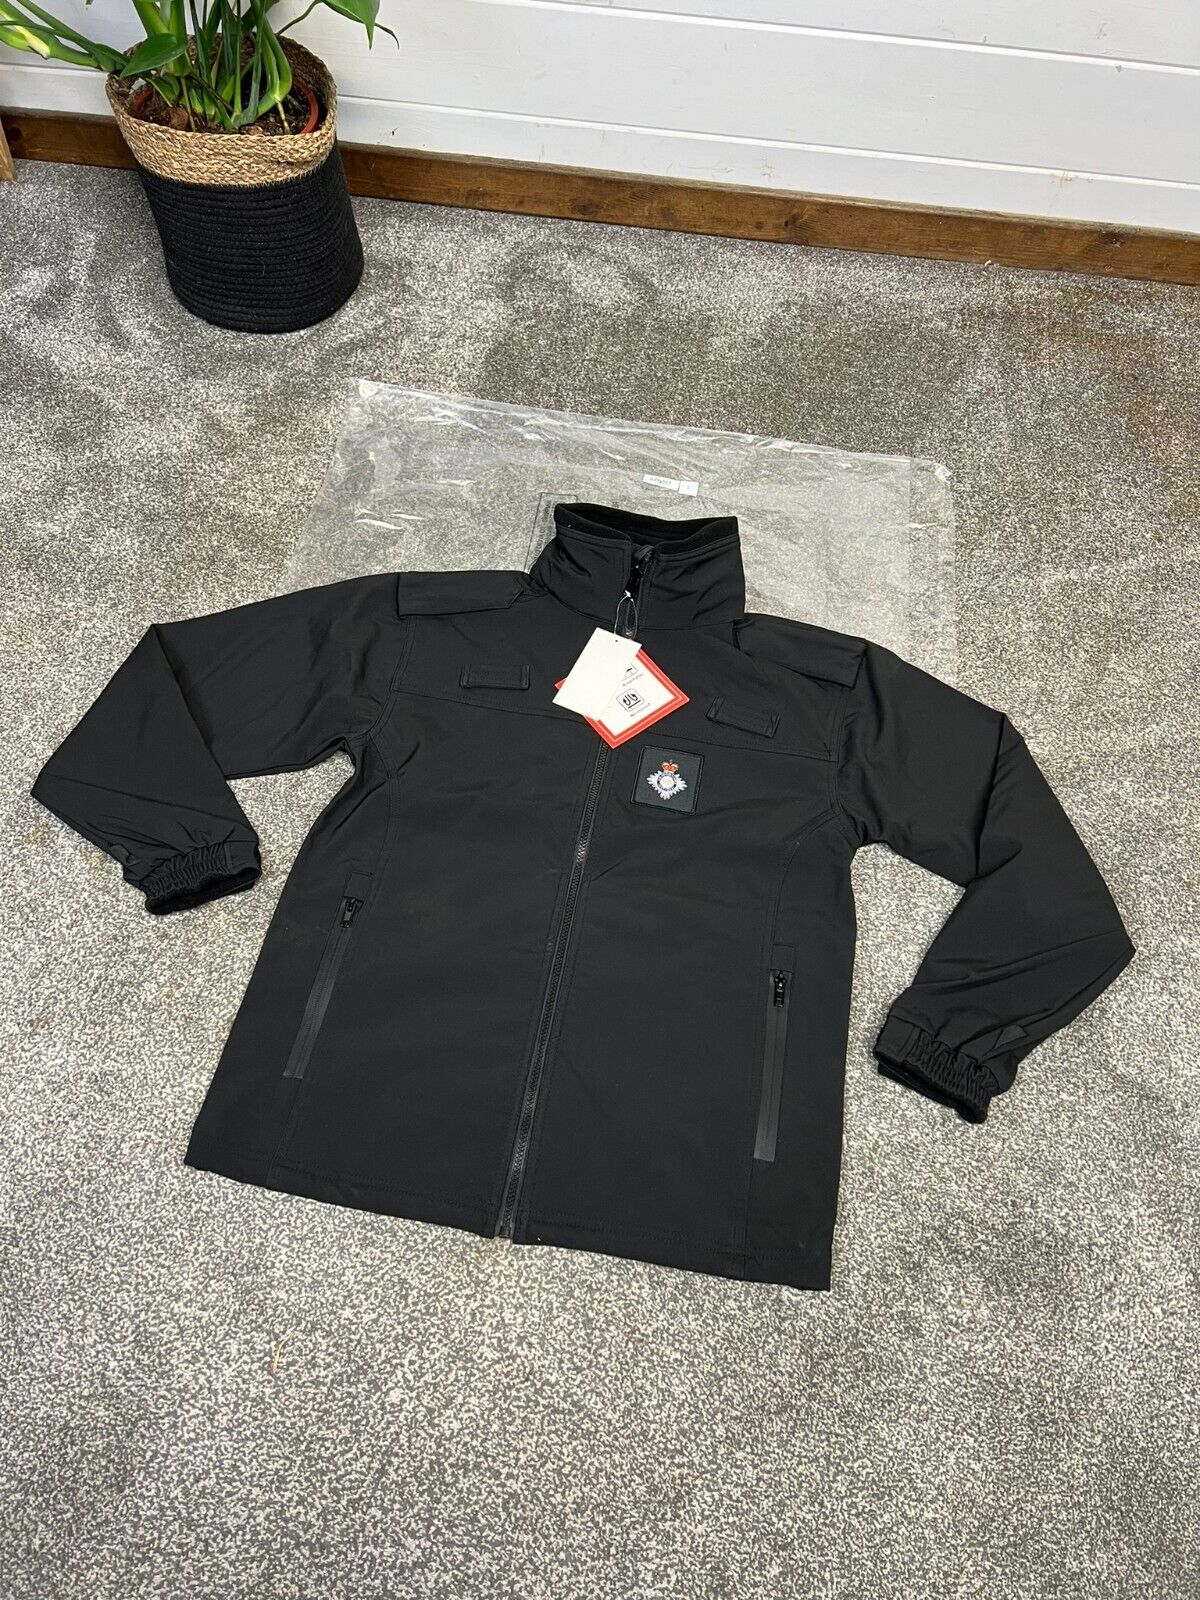 NEW Prison Uniform Black Softshell Jacket Waterproof Breathable Security SMALL